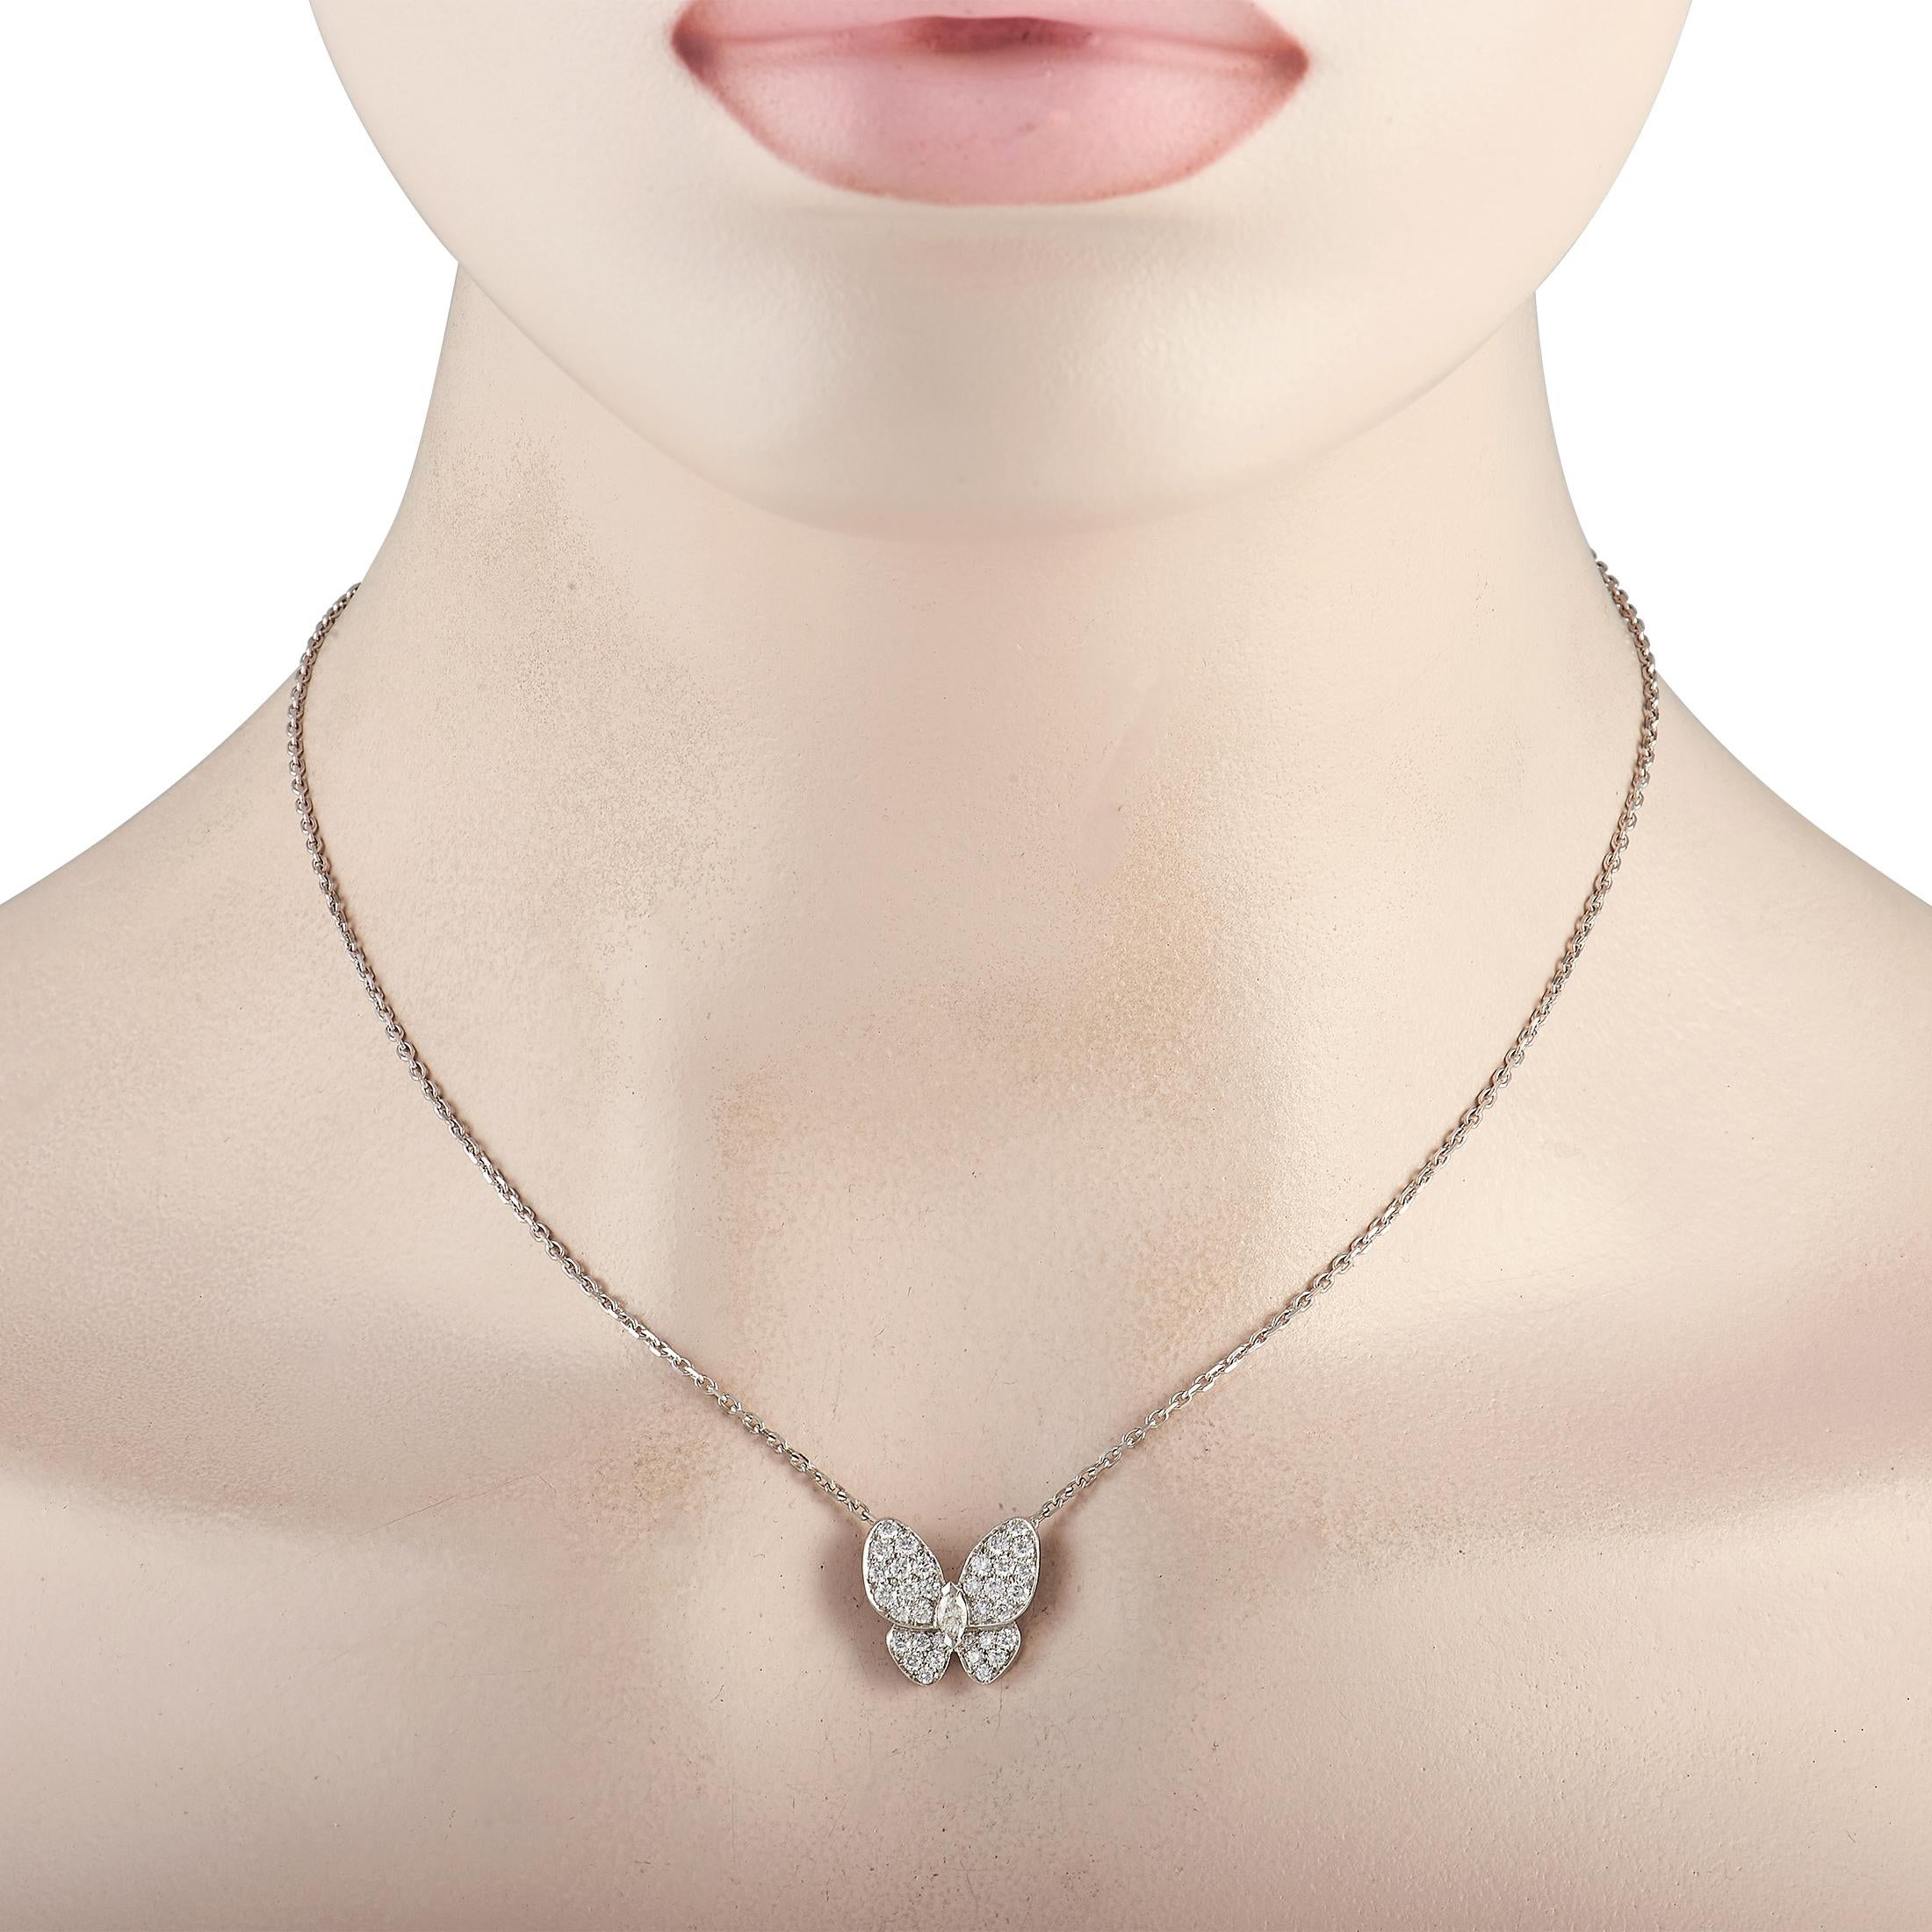 A necklace to remind you to break out of your cocoon. This beautiful Van Cleef & Arpels Papillon necklace features a stunning and sparkling butterfly pendant pavé-set with diamonds. The dainty white gold pendant hangs from a 16-inch long necklace